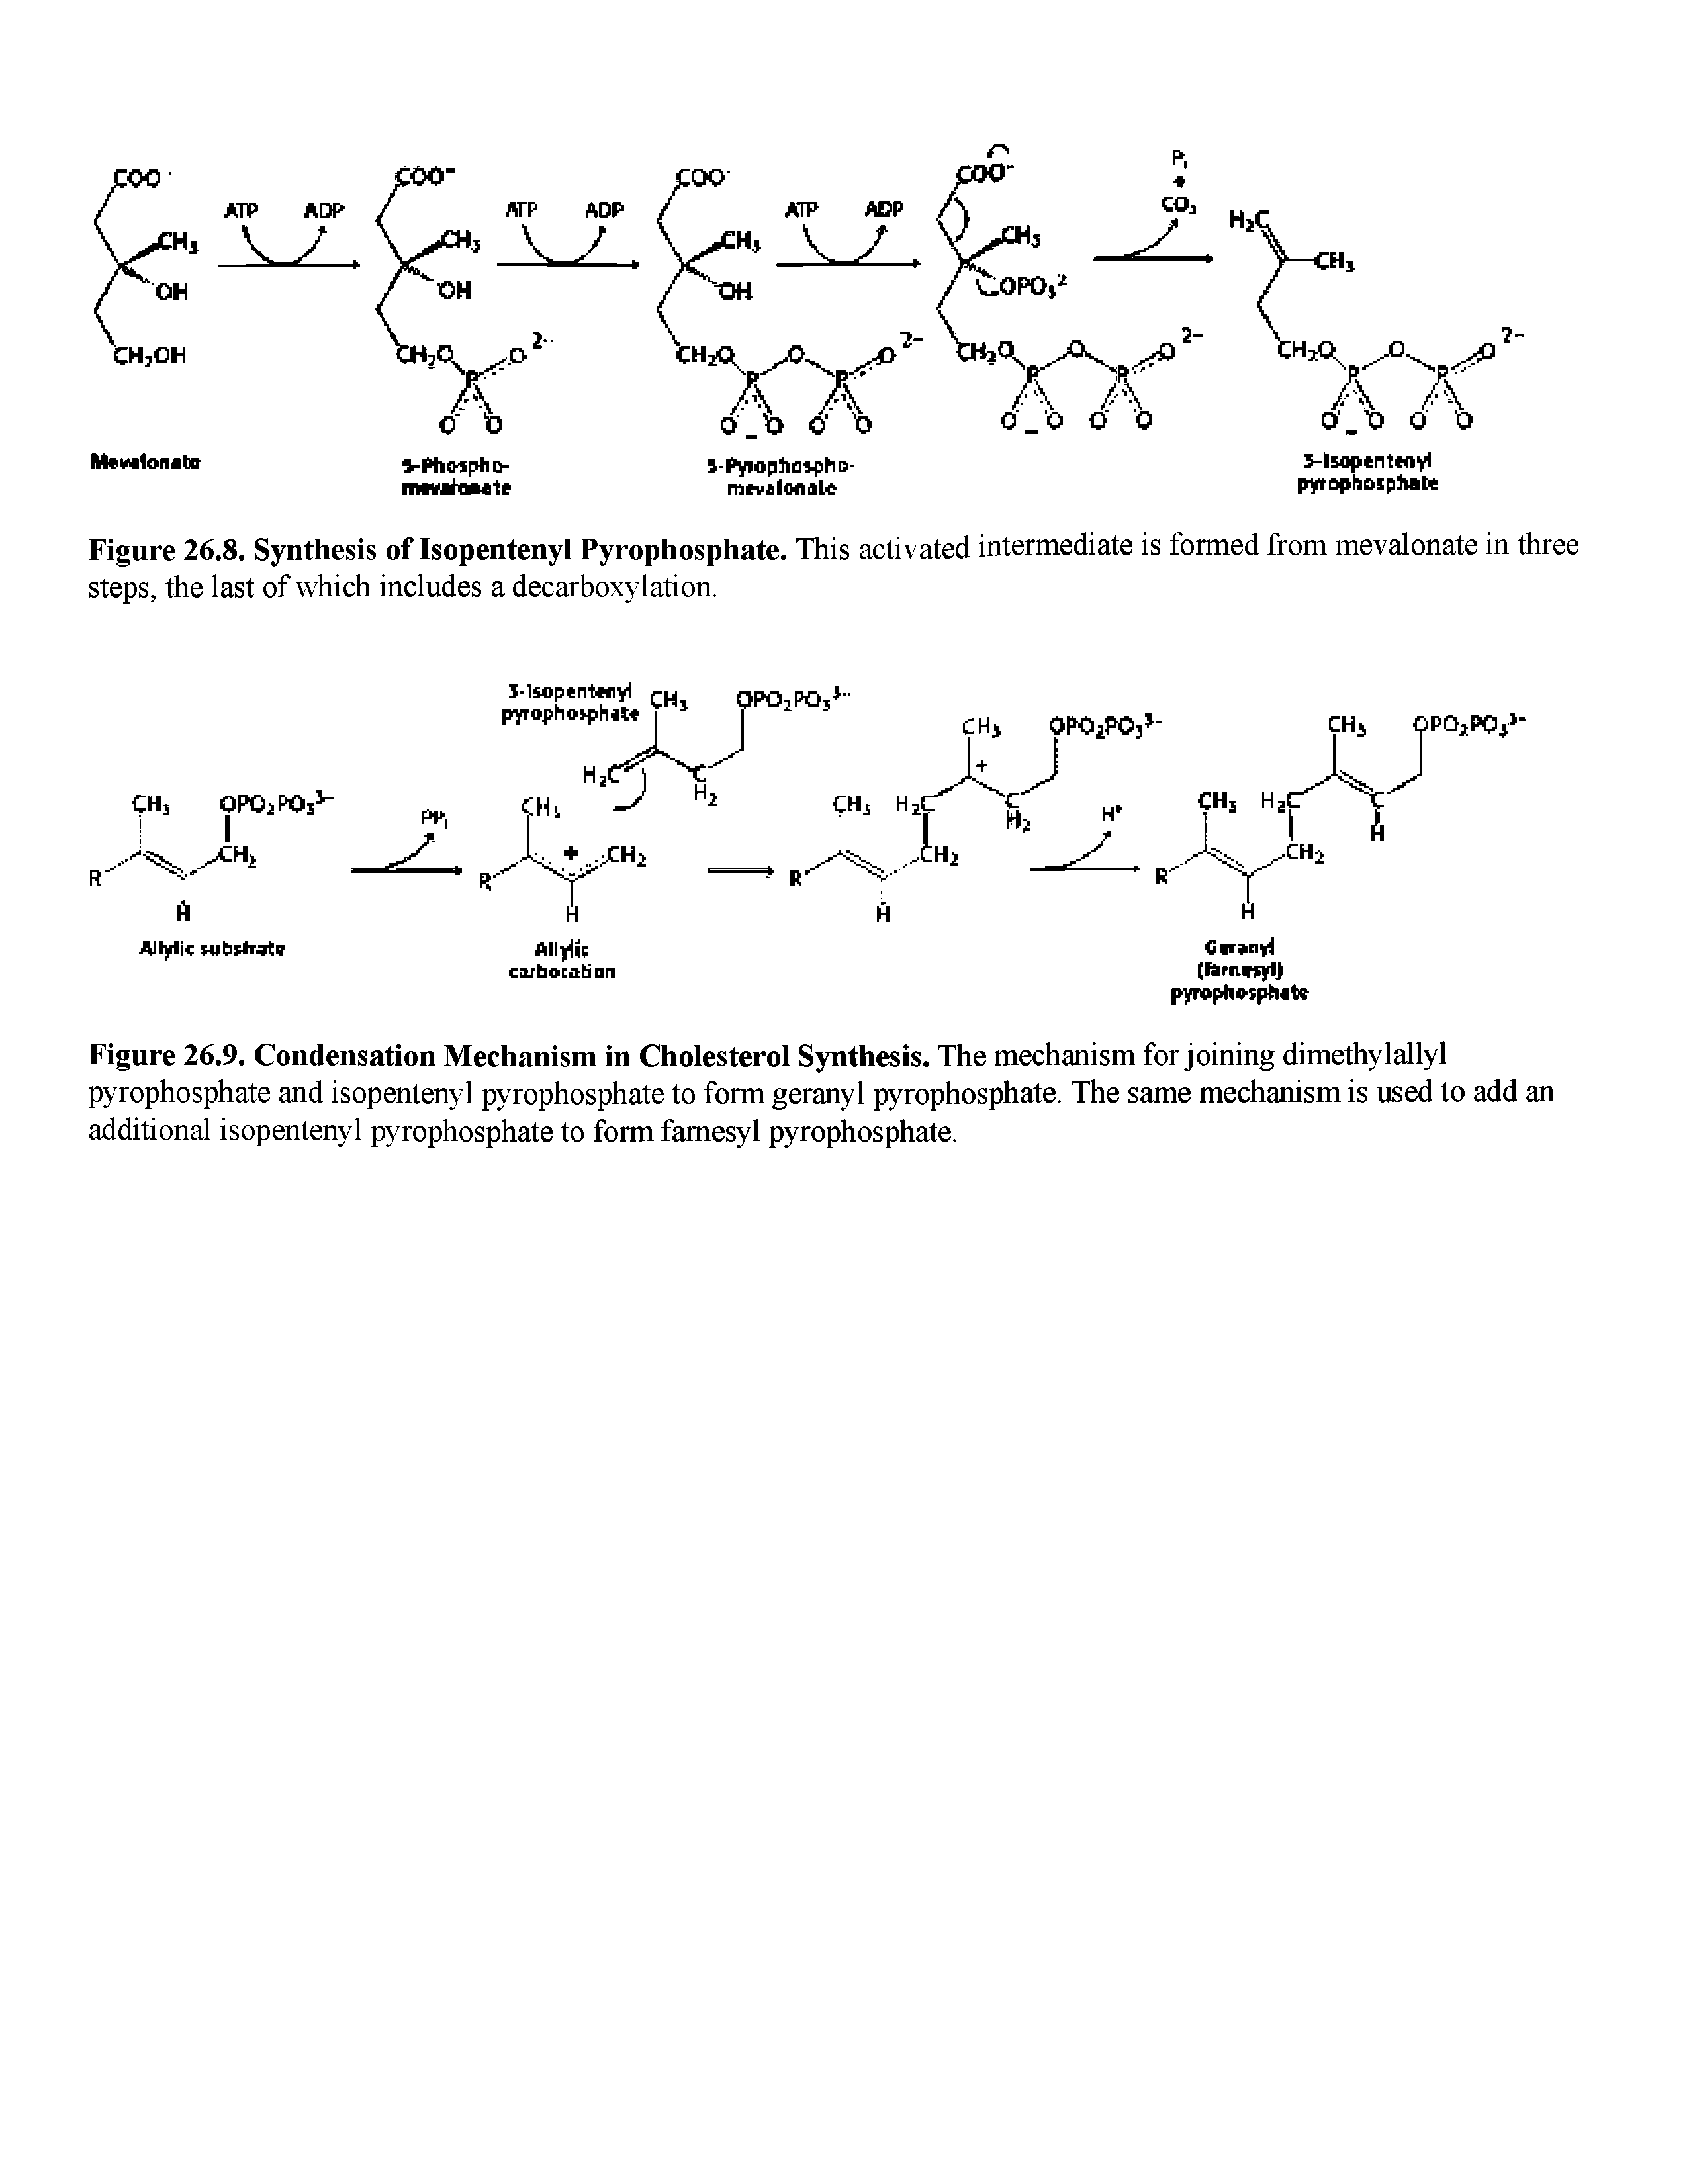 Figure 26.8. Synthesis of Isopentenyl Pyrophosphate. This activated intermediate is formed from mevalonate in three steps, the last of which includes a decarboxylation.